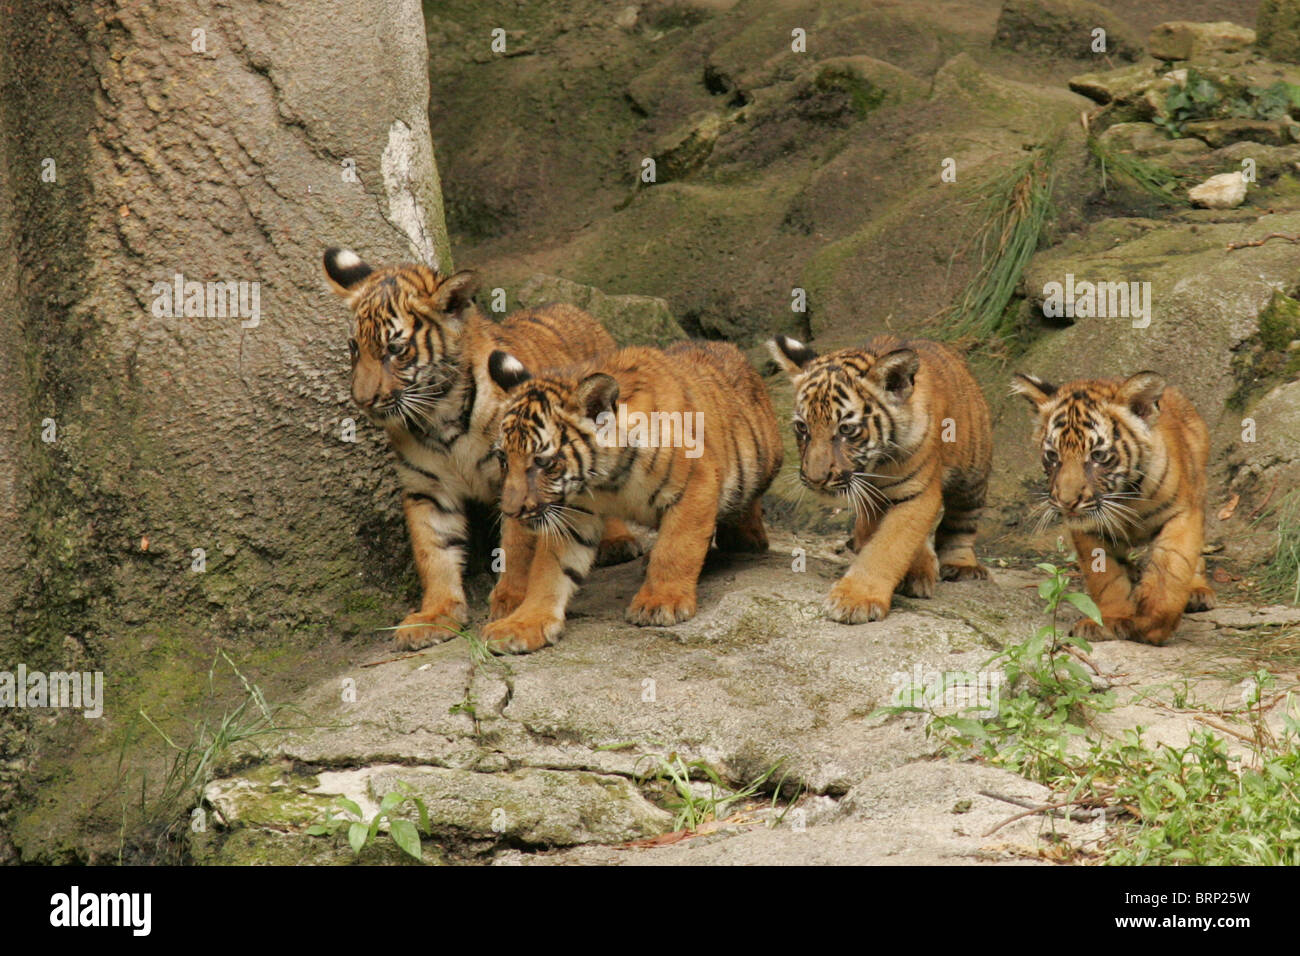 Four Malayan Tigers cubs standing together and looking down from a rock Stock Photo